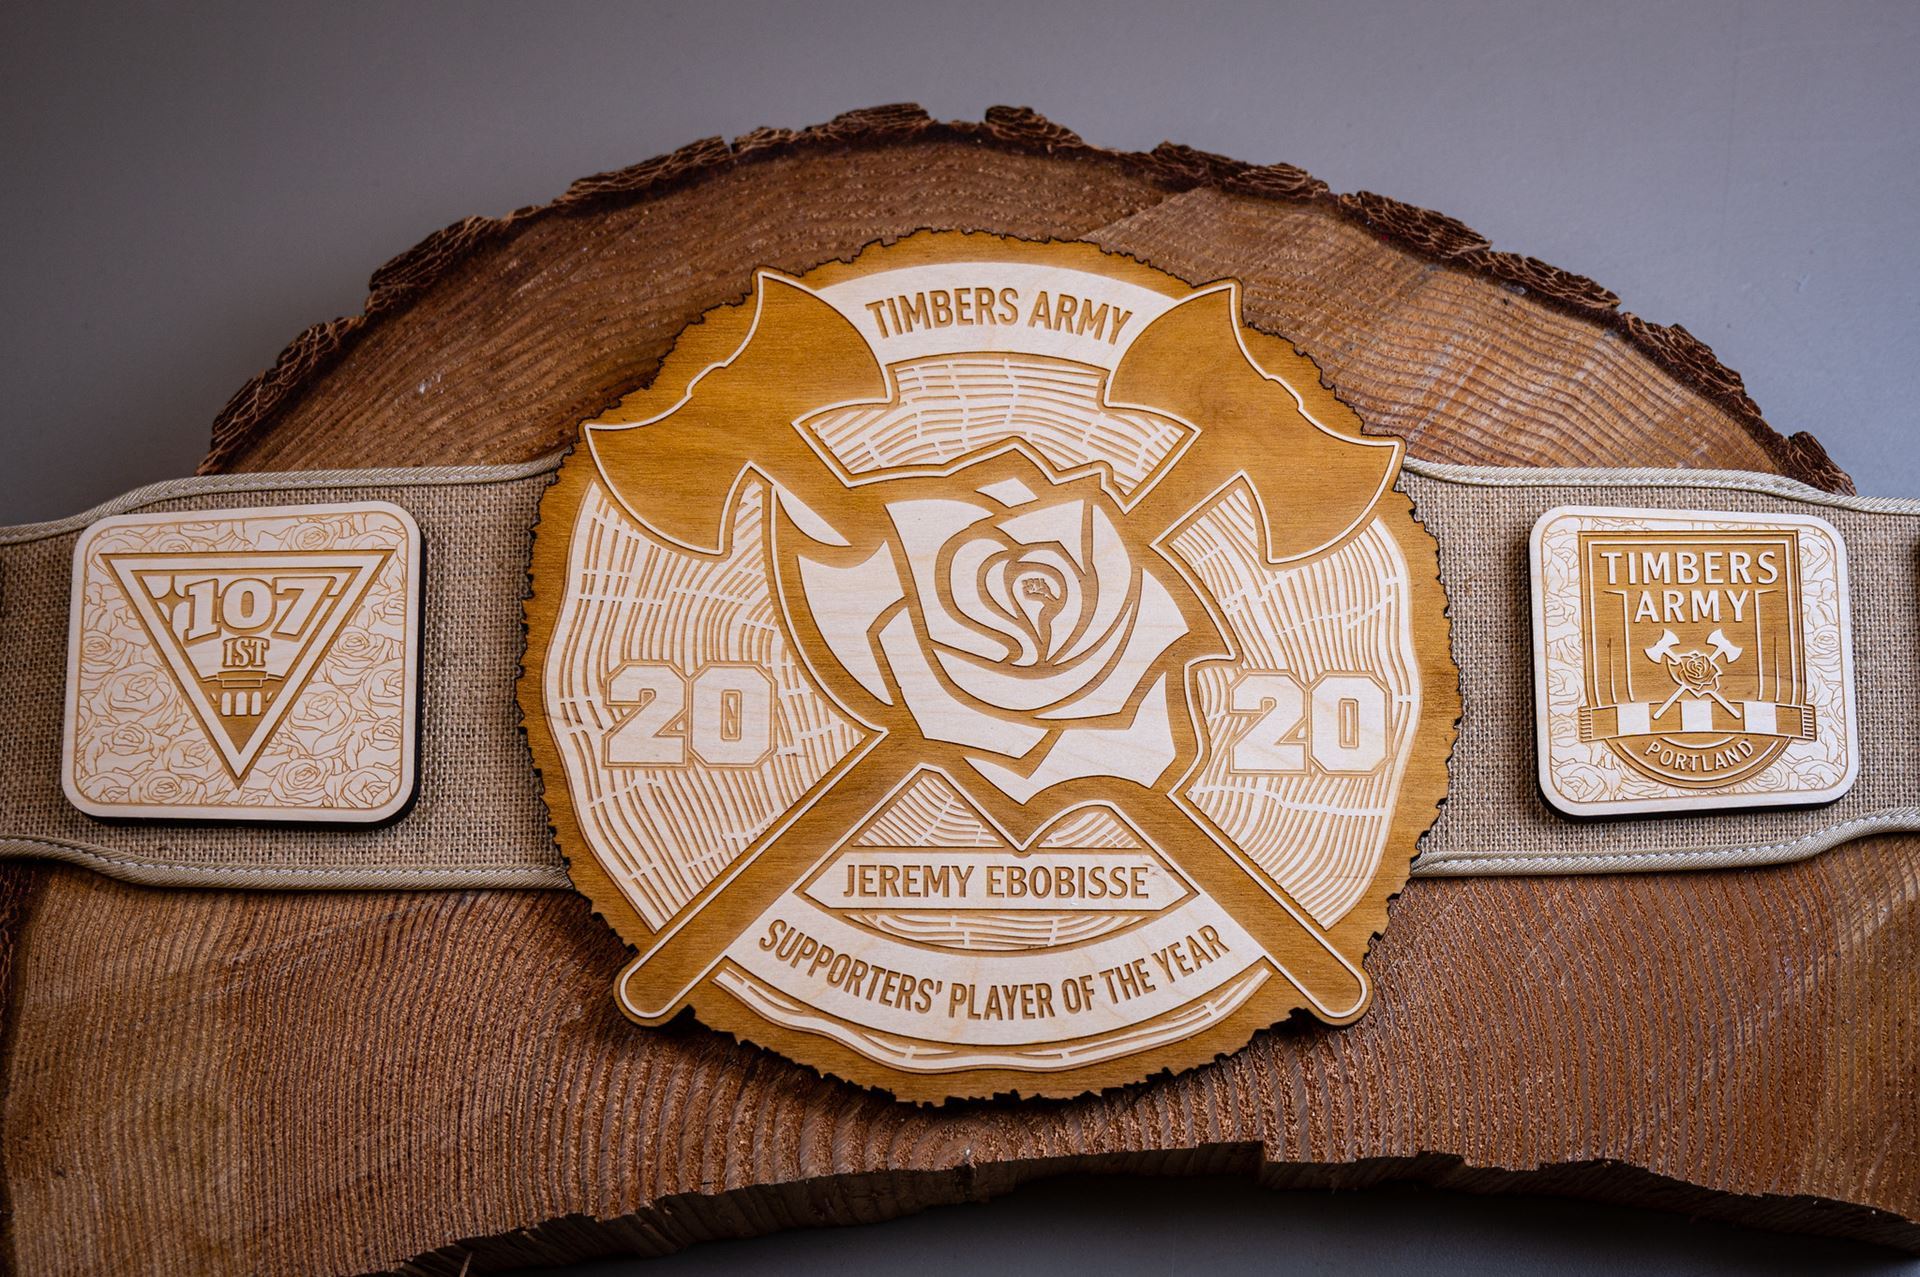 2020 Supporters' Player of the Year belt